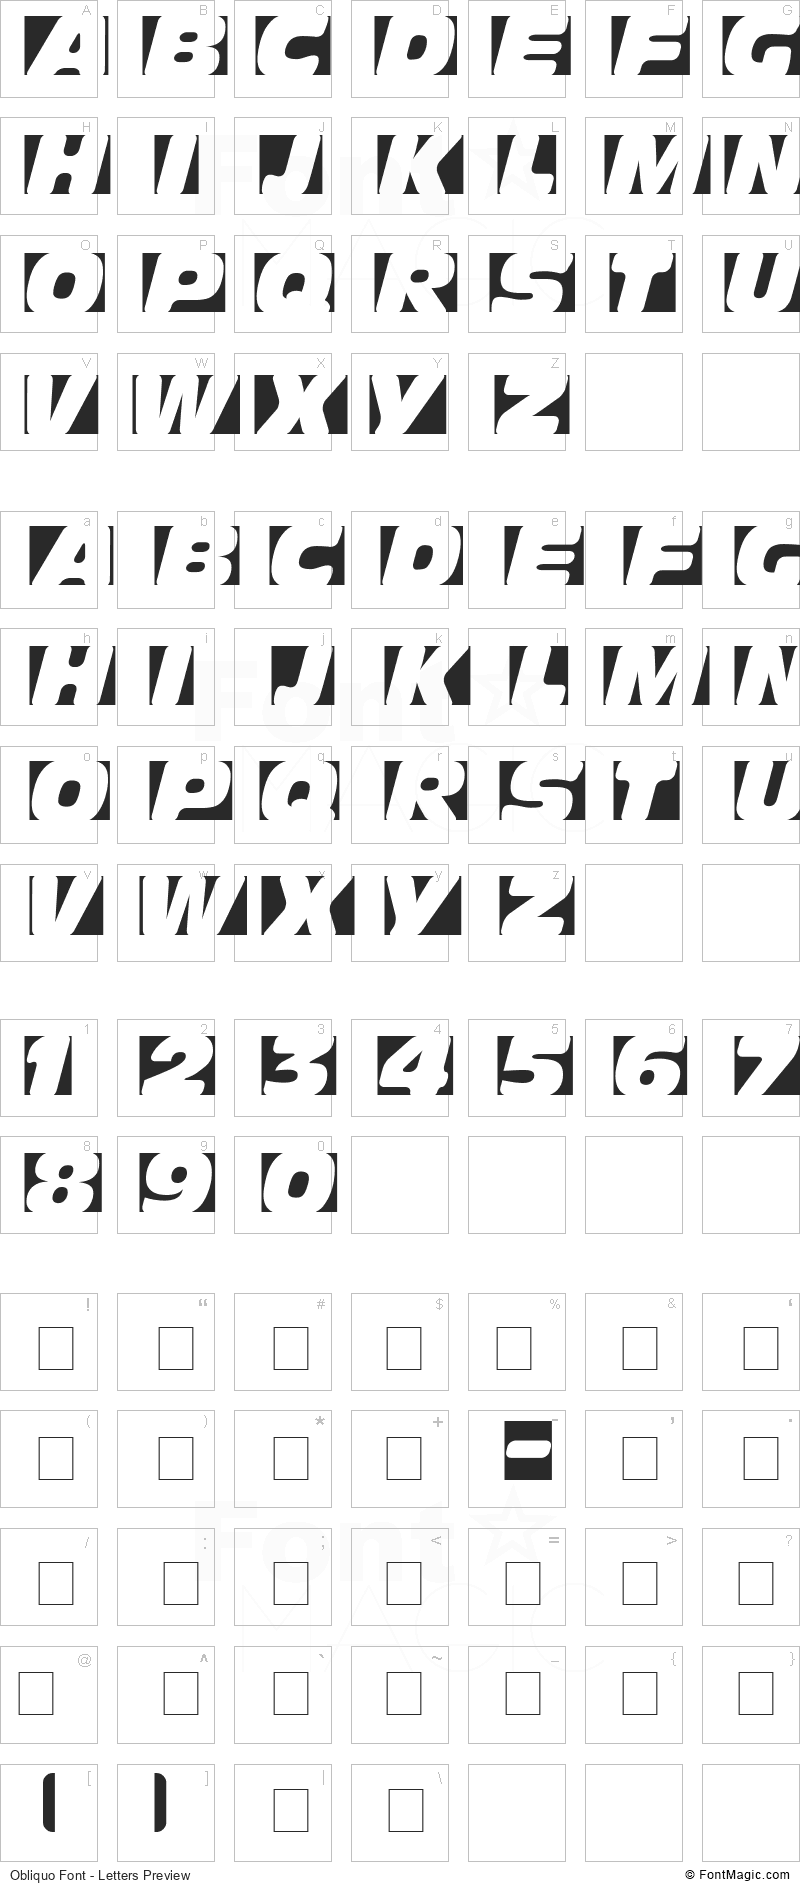 Obliquo Font - All Latters Preview Chart